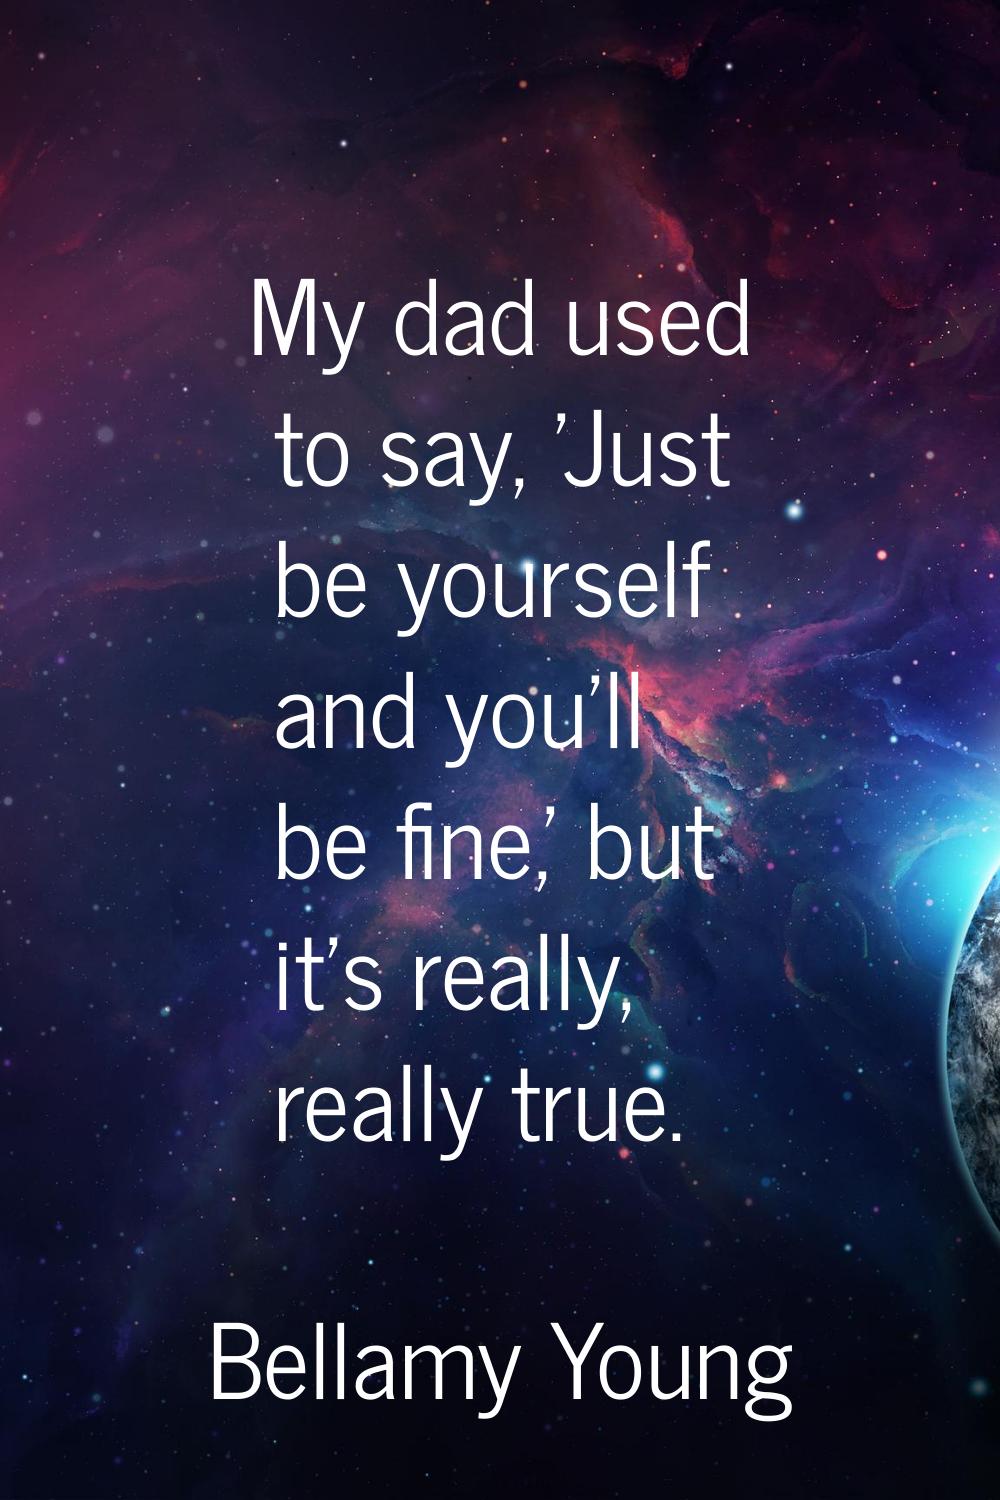 My dad used to say, 'Just be yourself and you'll be fine,' but it's really, really true.